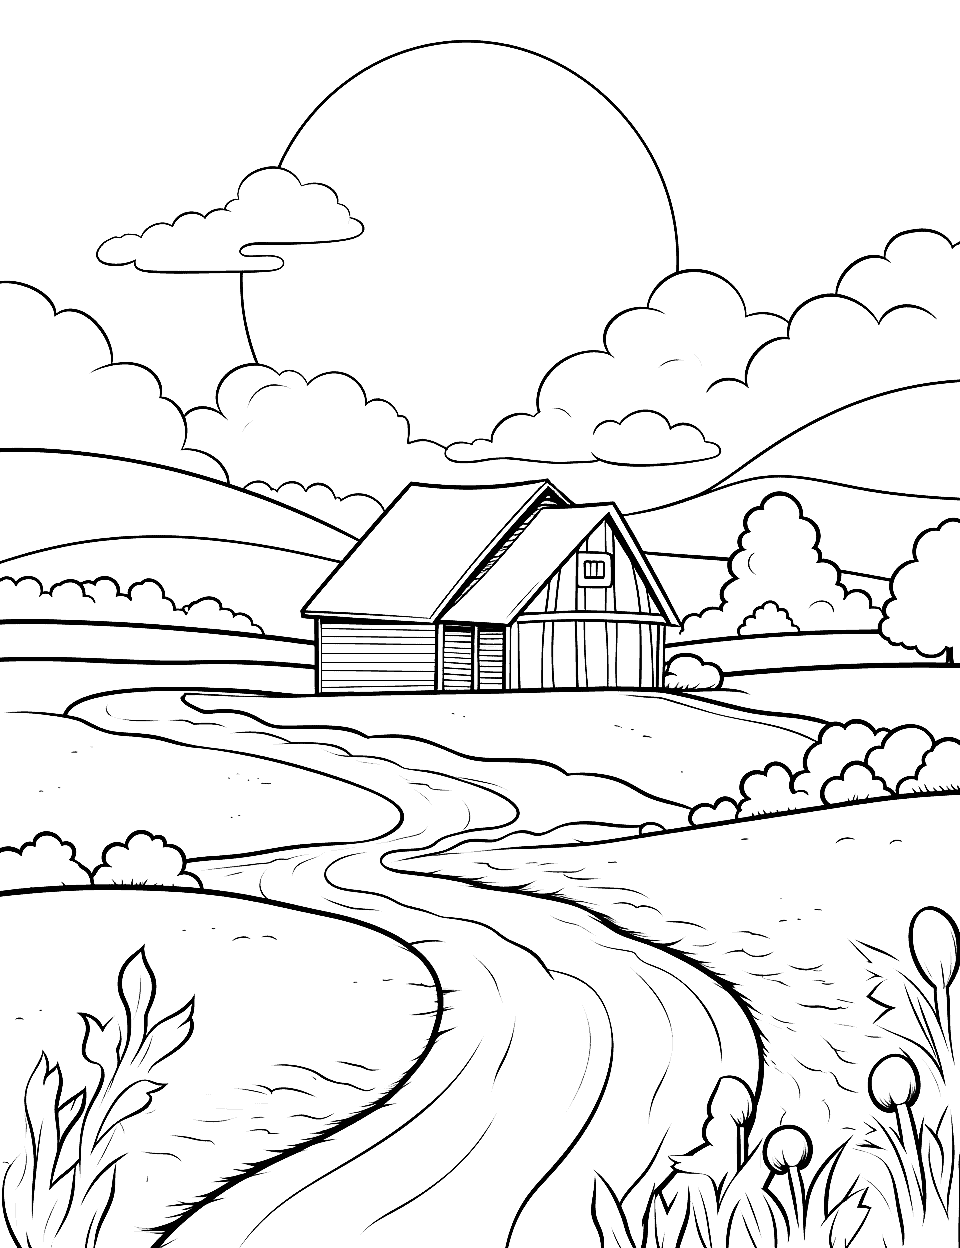 Farm Landscape with Barn Nature Coloring Page - A simple farm scene with a barn and a clear sky in the distance from the twisting road.